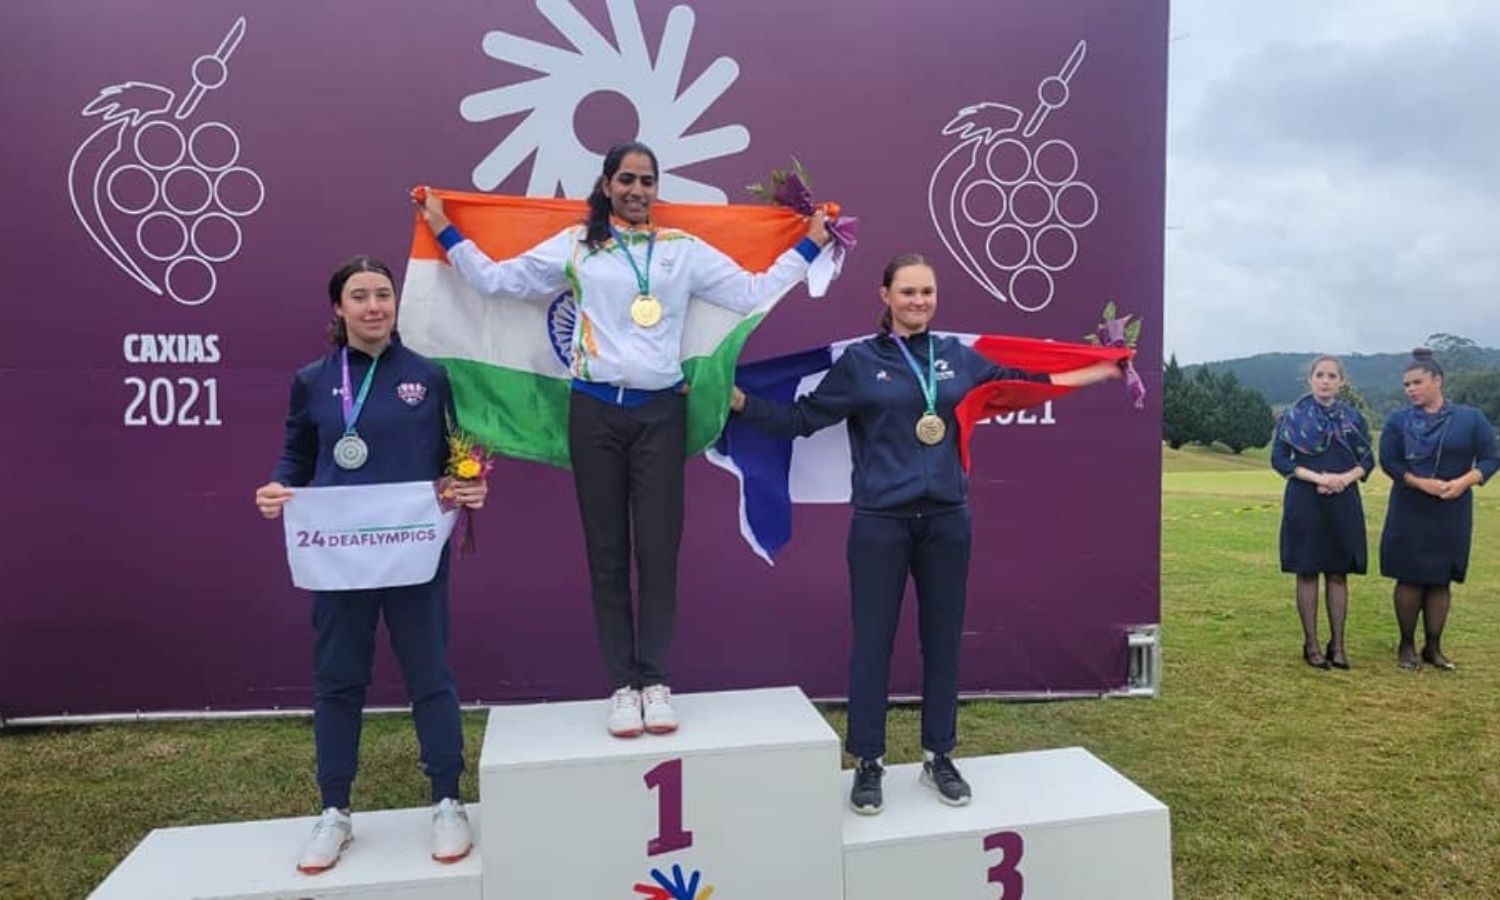 Deaflympics gold has inspired me to win medals at Asiad, 2024 Olympics